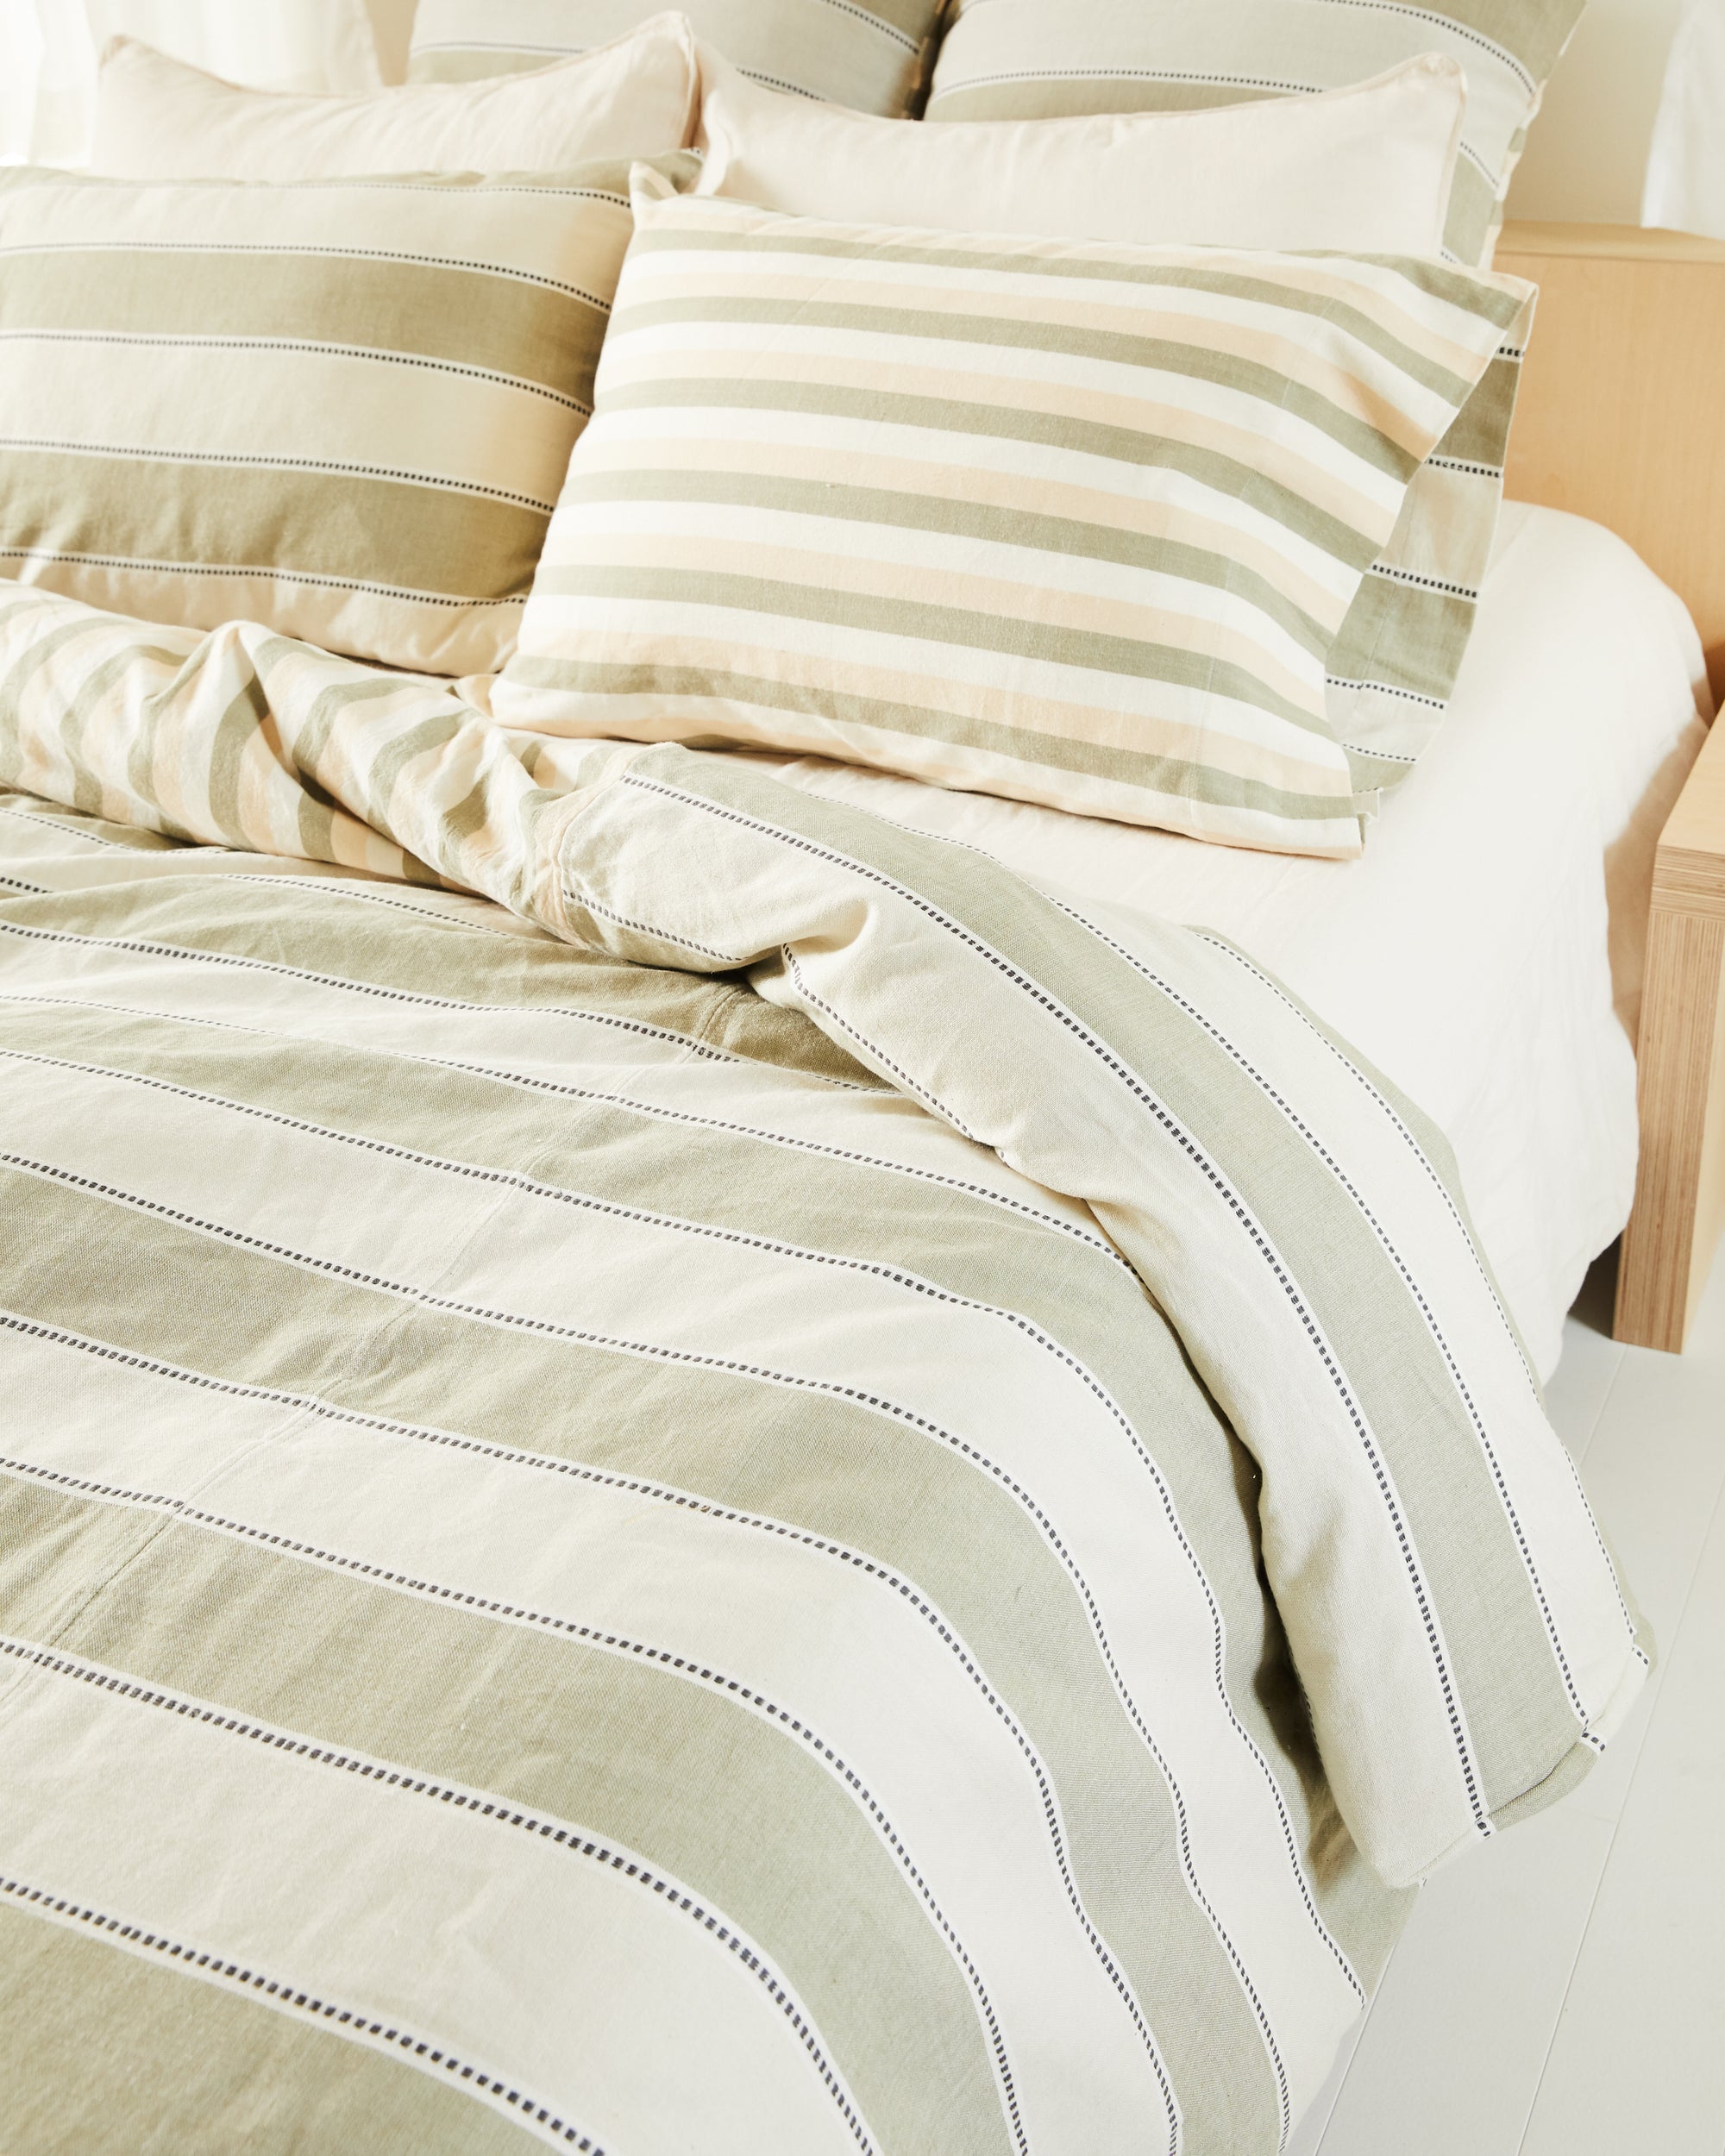 Ethically handwoven oeko-tex certified cotton MINNA duvet cover, sage green stripes